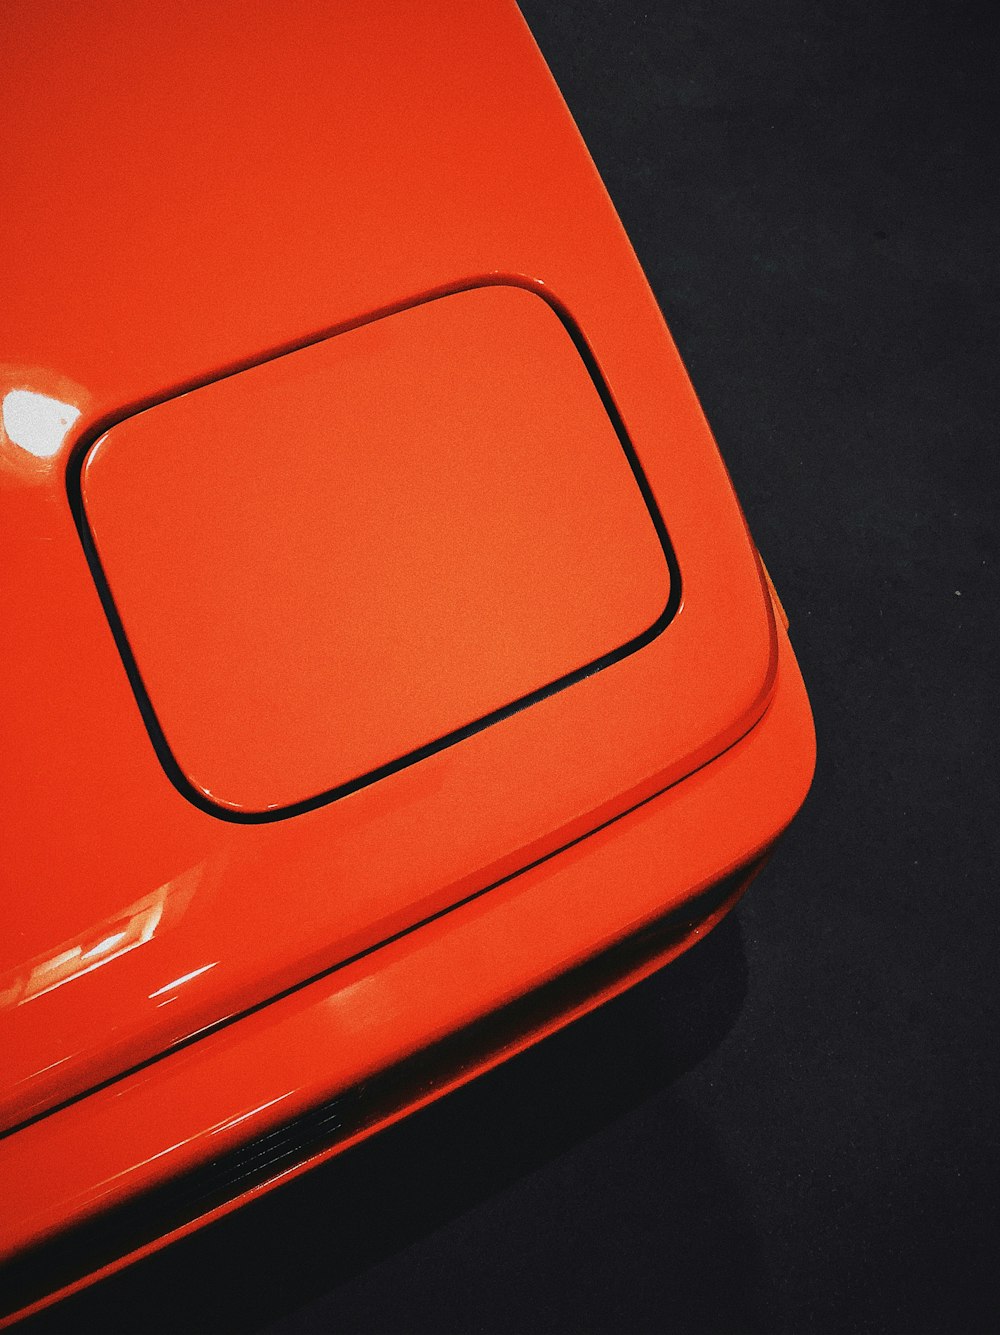 a close up of a red car with a black background